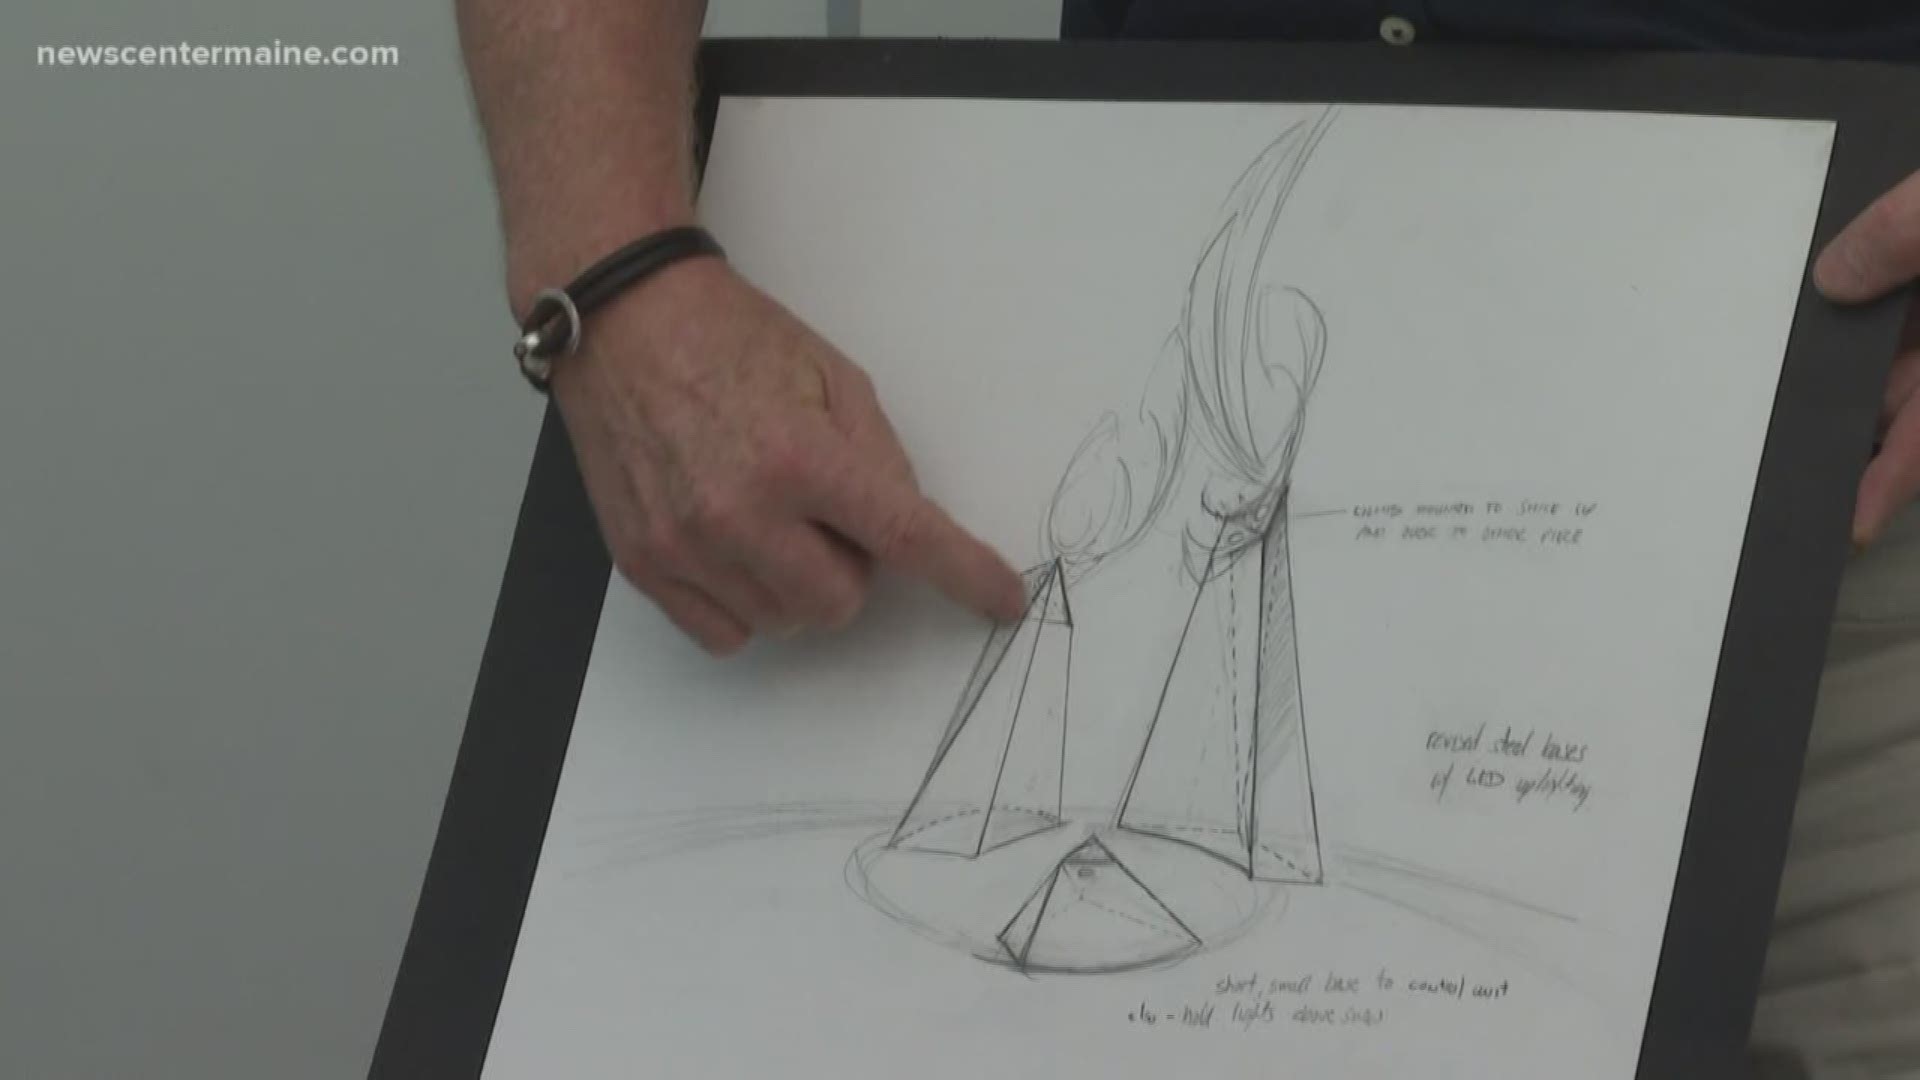 Mark Pettegrow's art will adorn a future roundabout that will be built in 2020 in Portland.